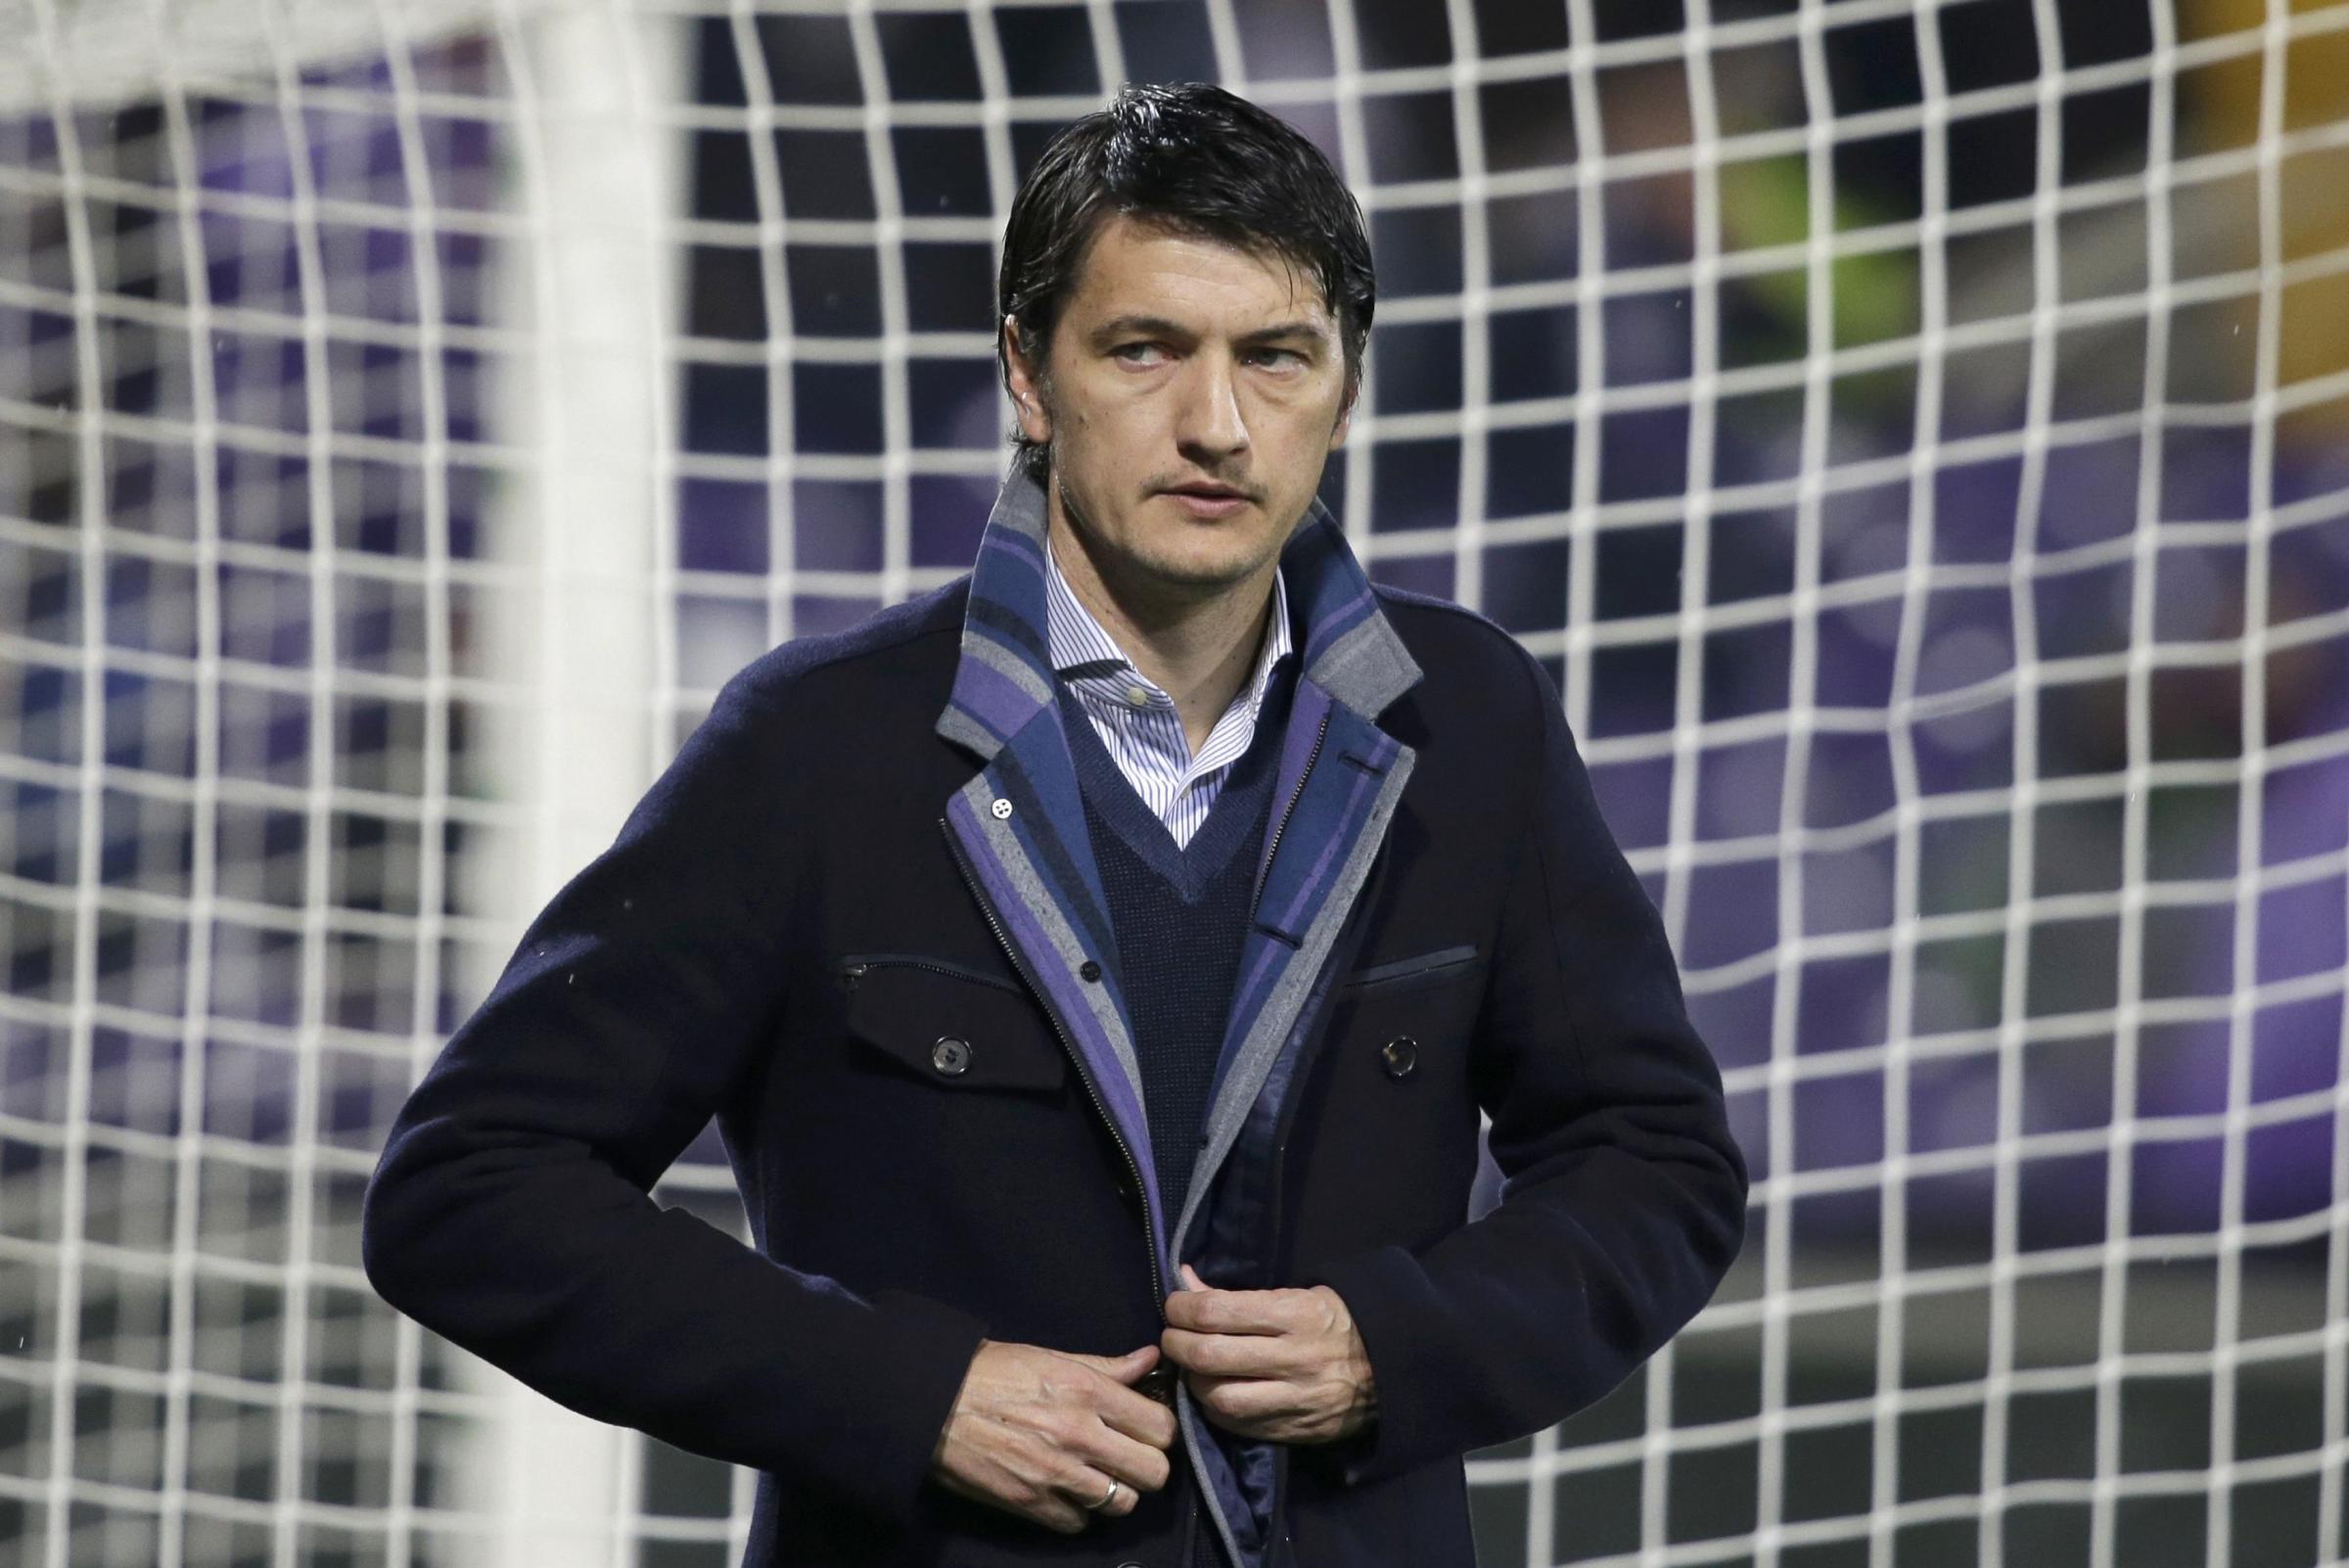 Watford to appoint Vladimir Ivic as new head coach